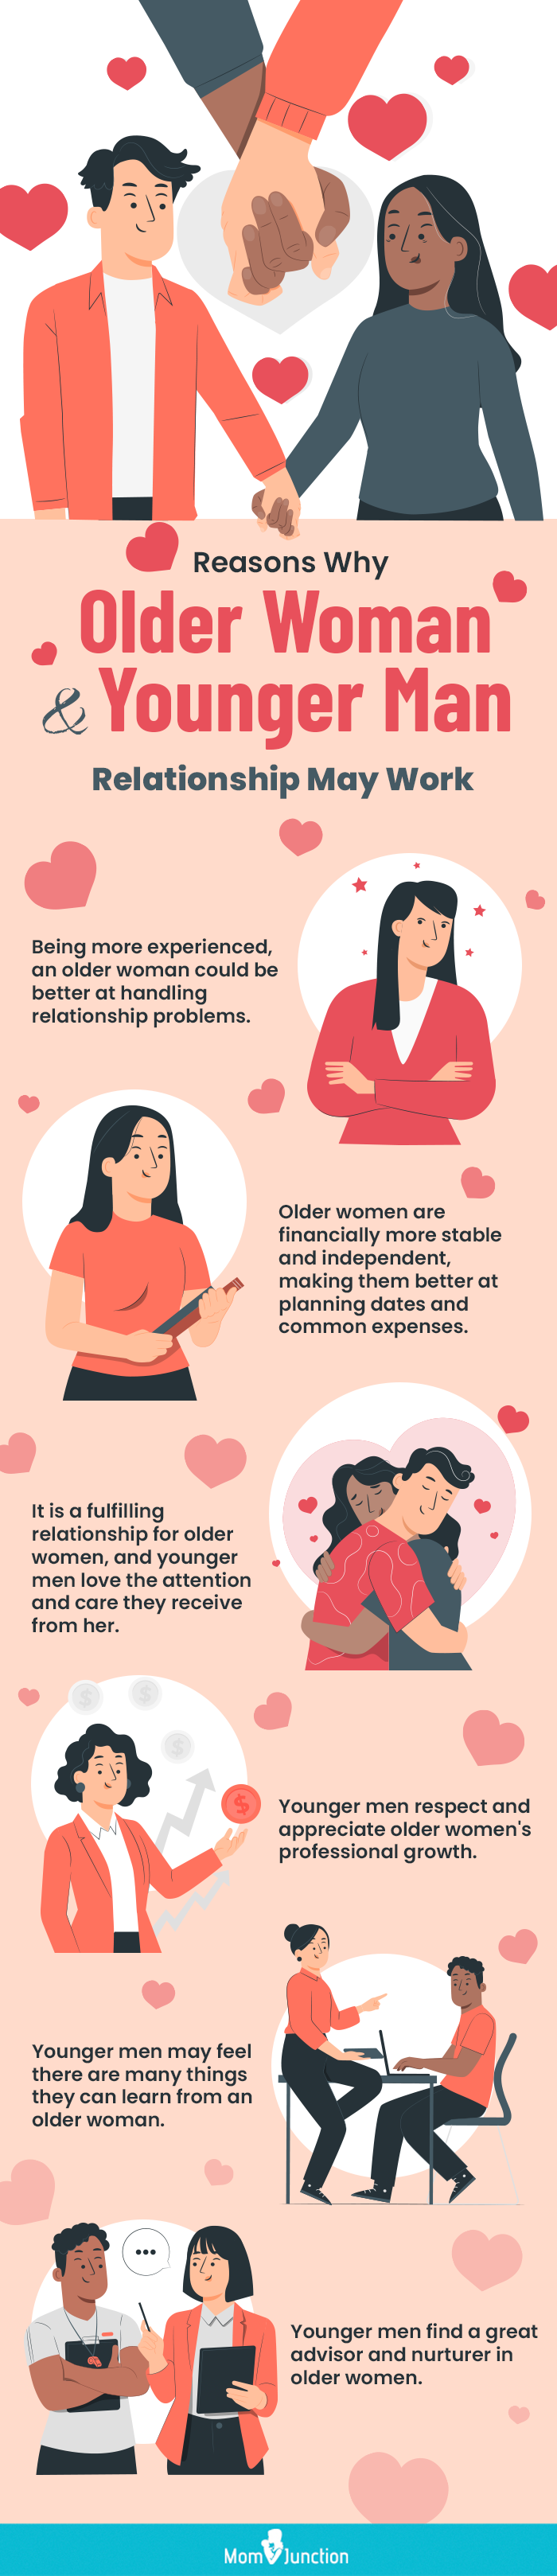 why this relationship might work (infographic)